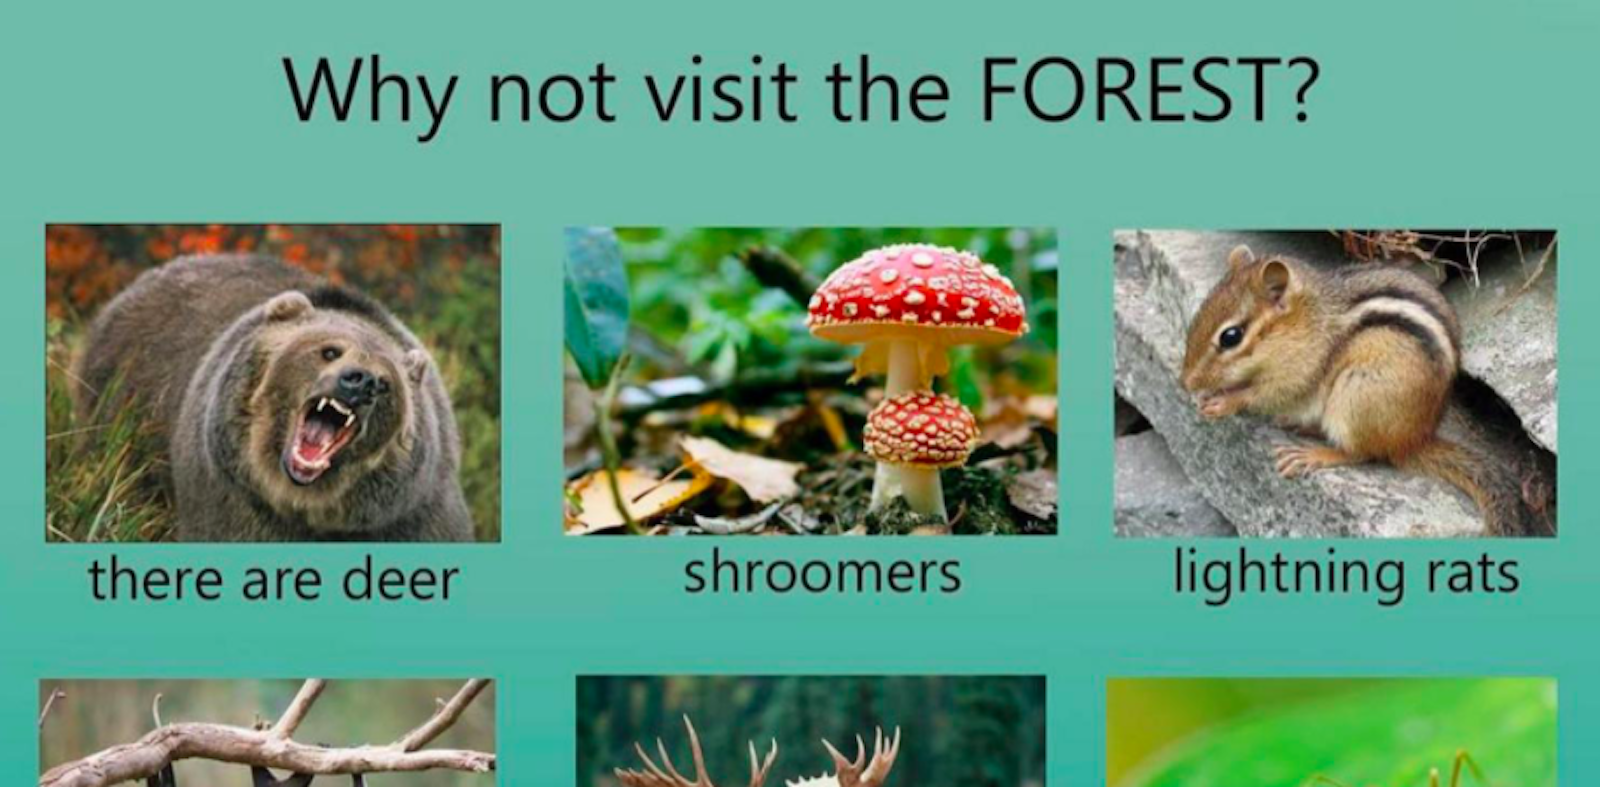 why not visit meme: forest animals described with weird names